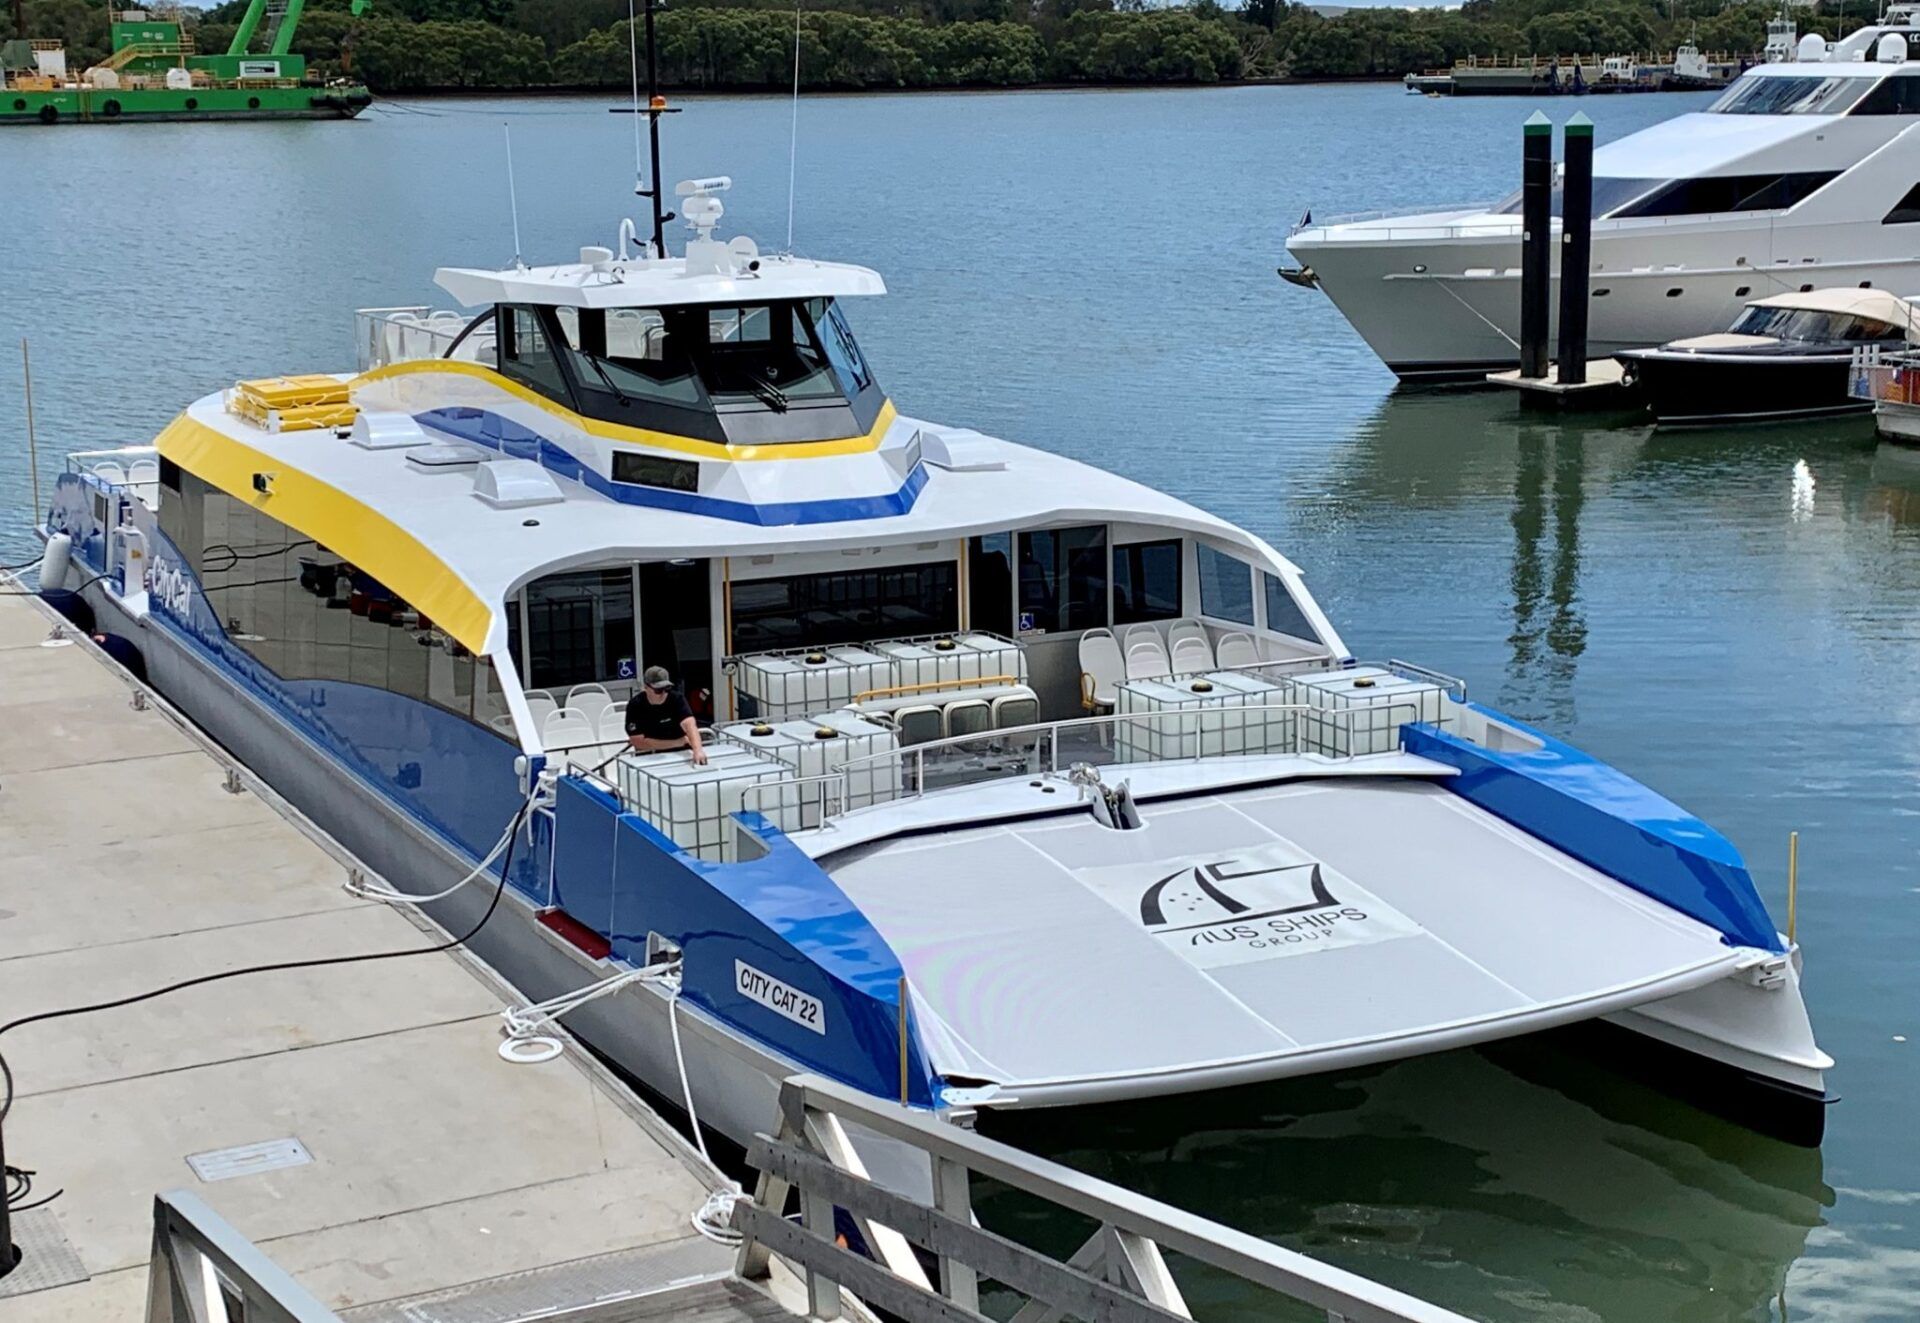 The Yoogerah, a new Brisbane River Ferry built by Aus Ships